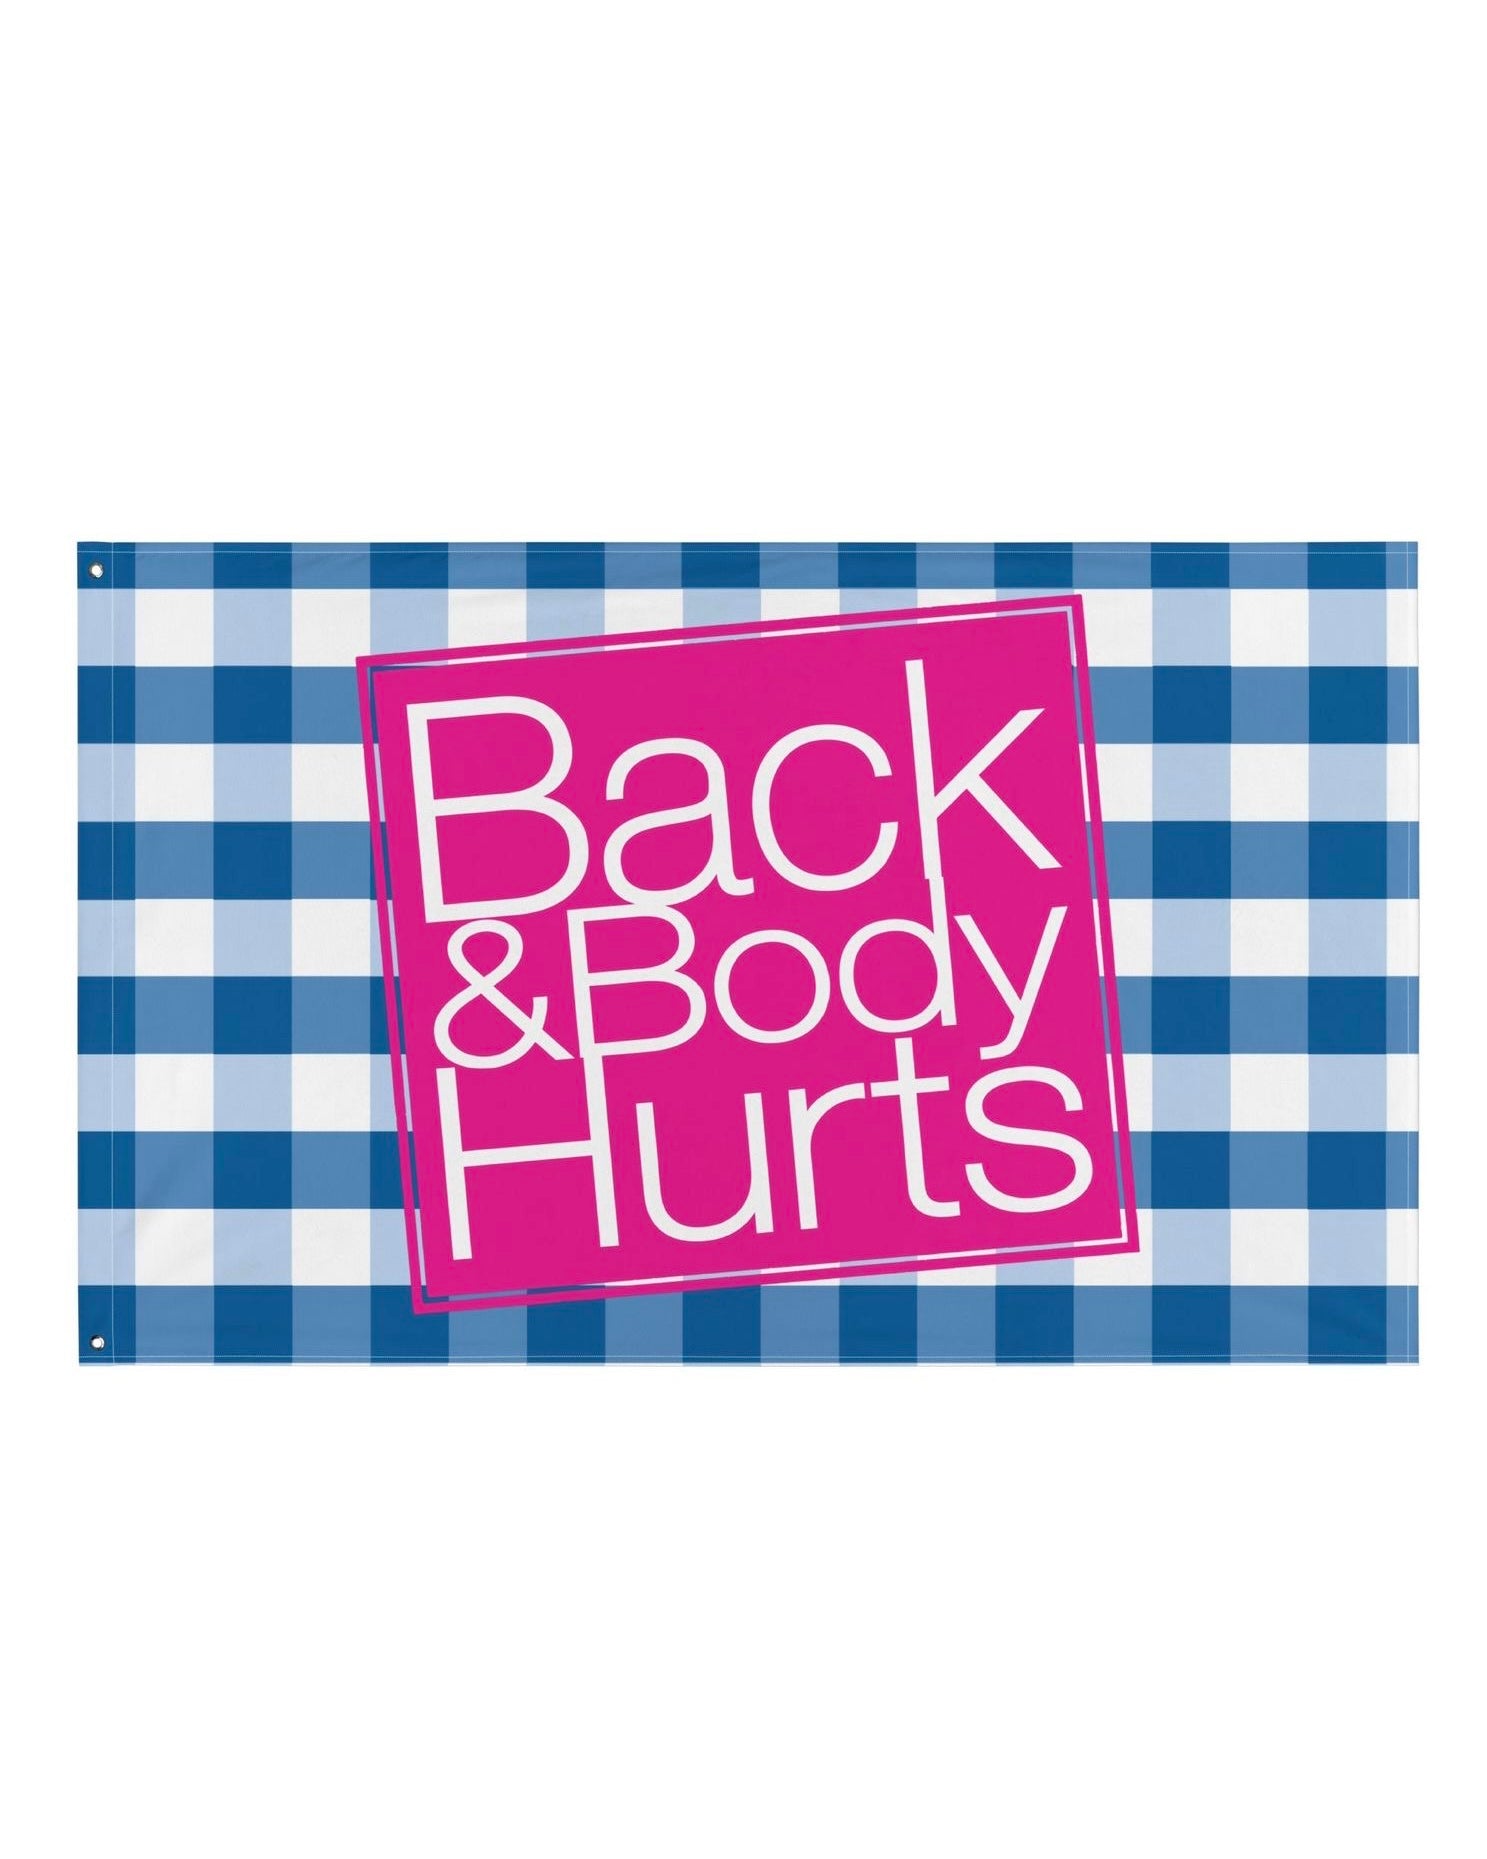 Back and Body Hurts Rave Flag, Flag, - One Stop Rave